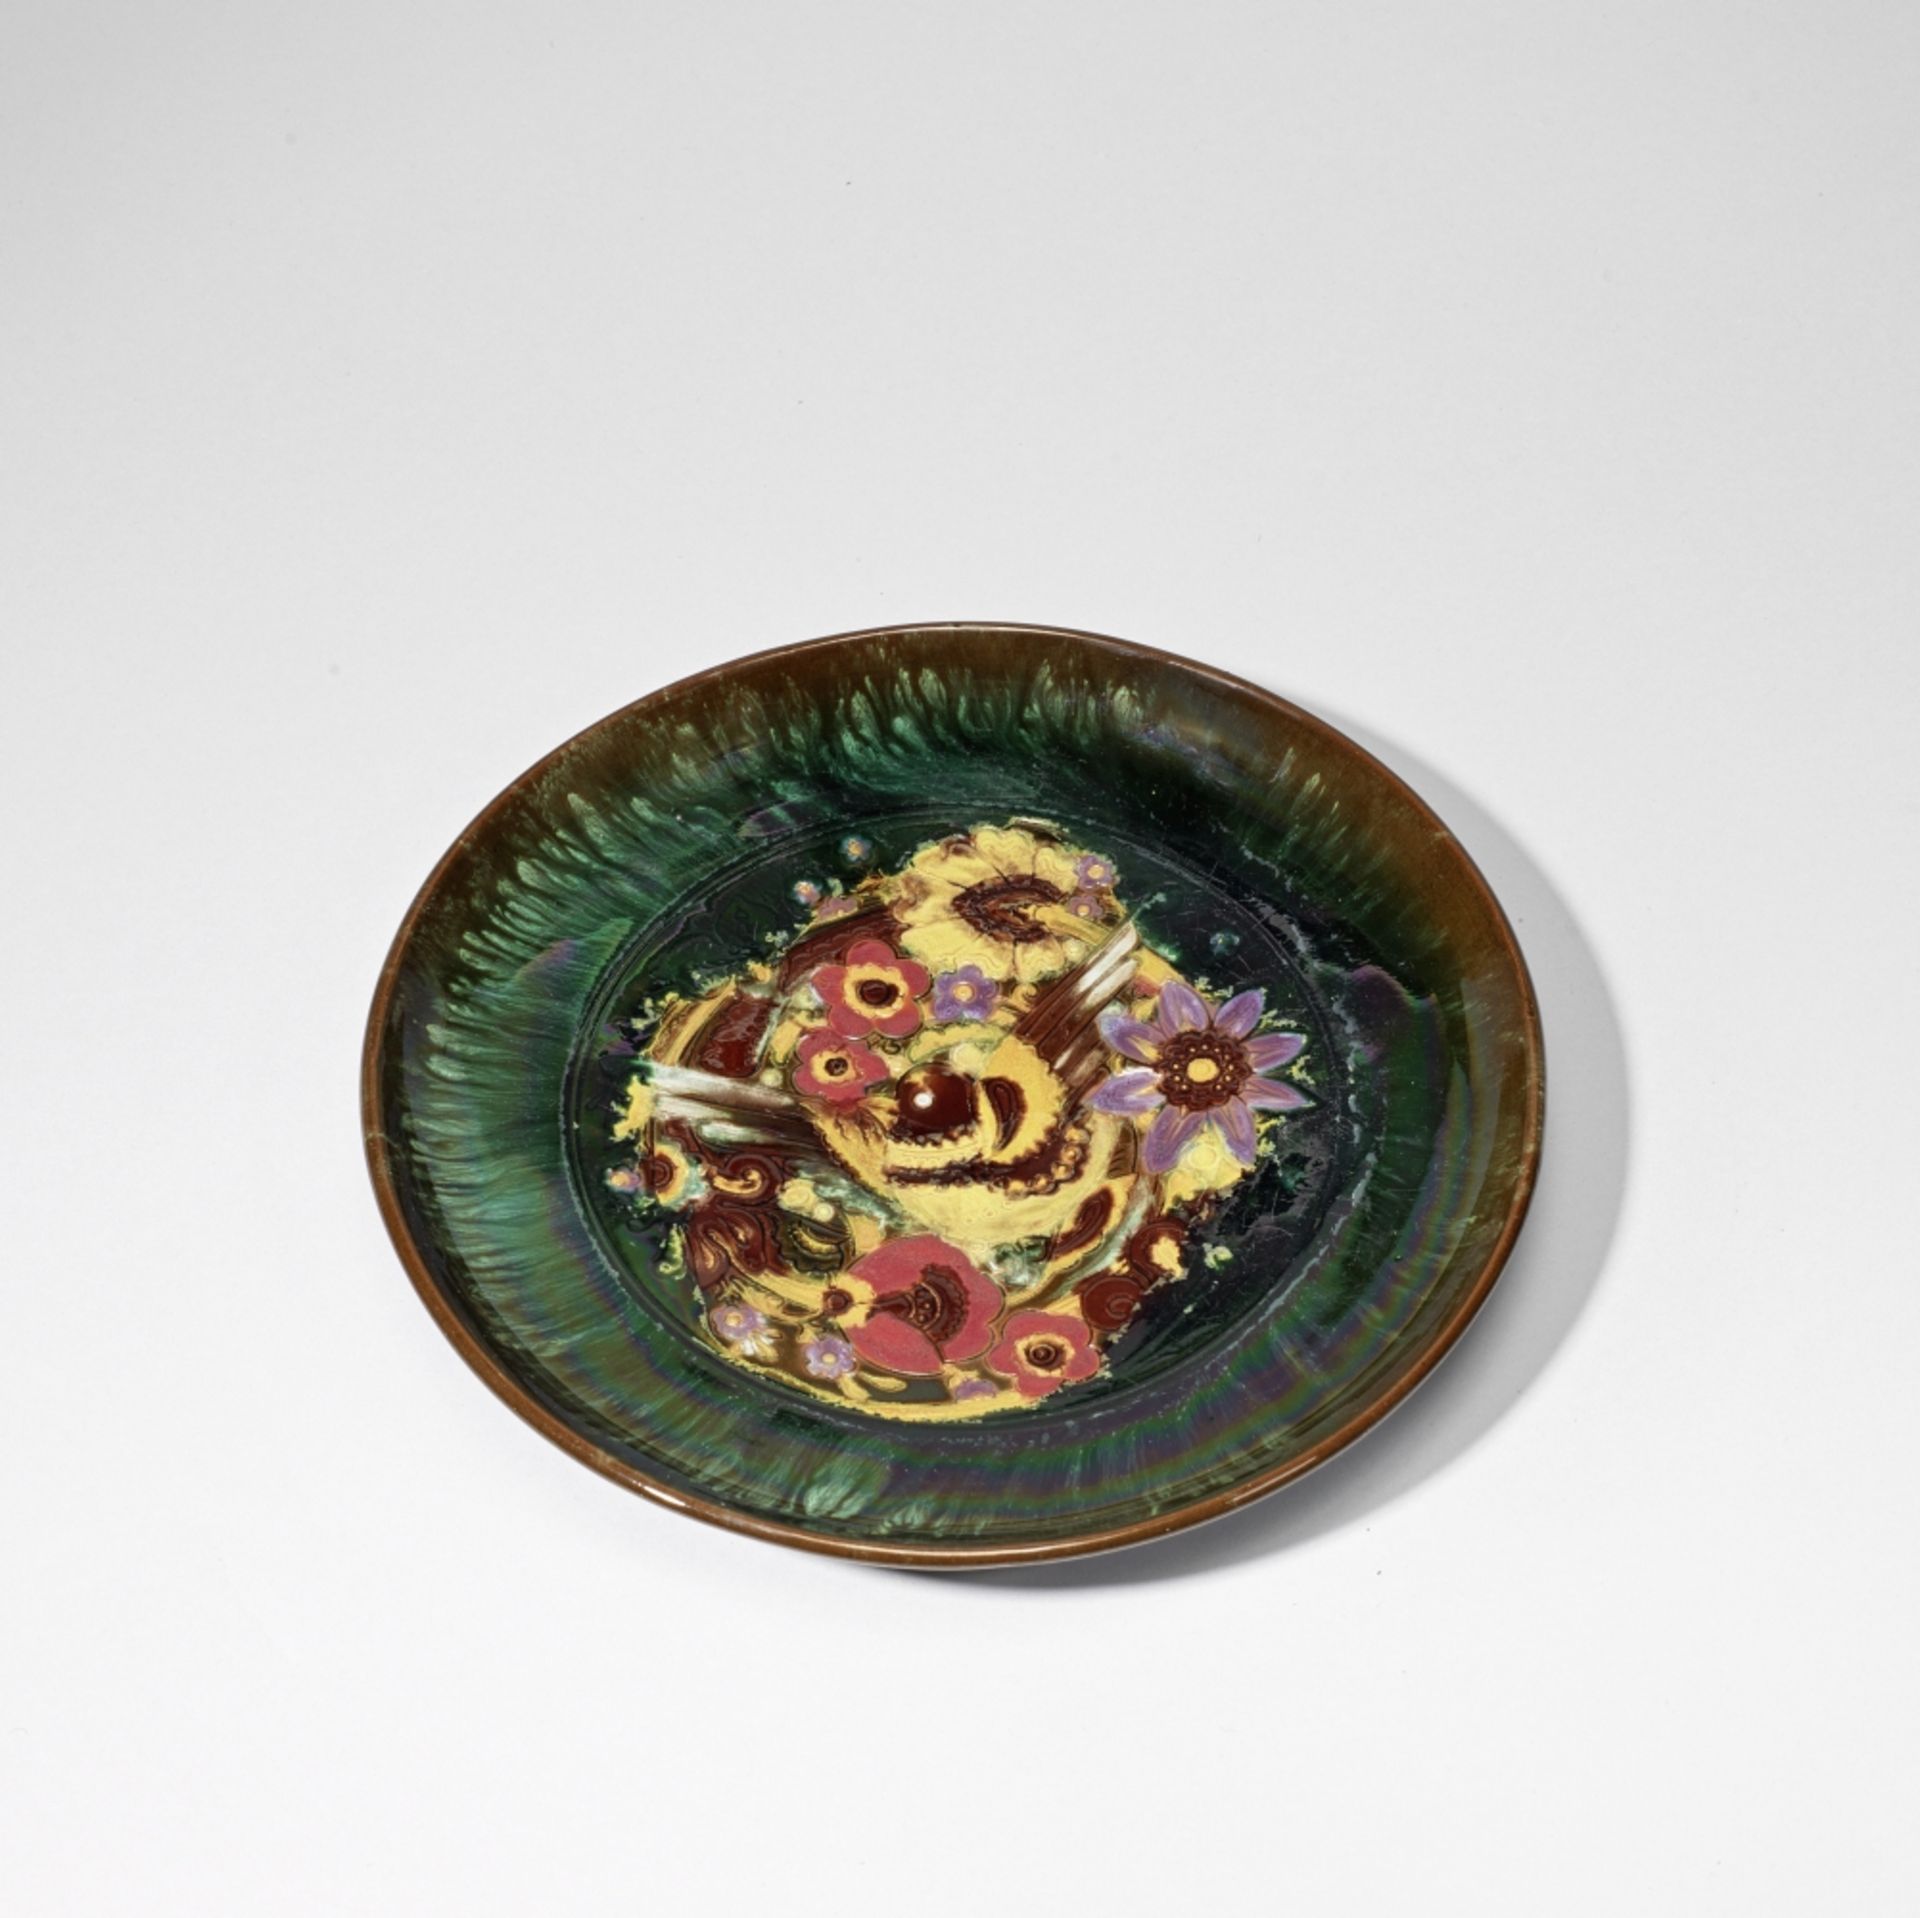 Dr Christopher Dresser: Made by Linthorpe Pottery Plate with moulded bird design, circa 1880